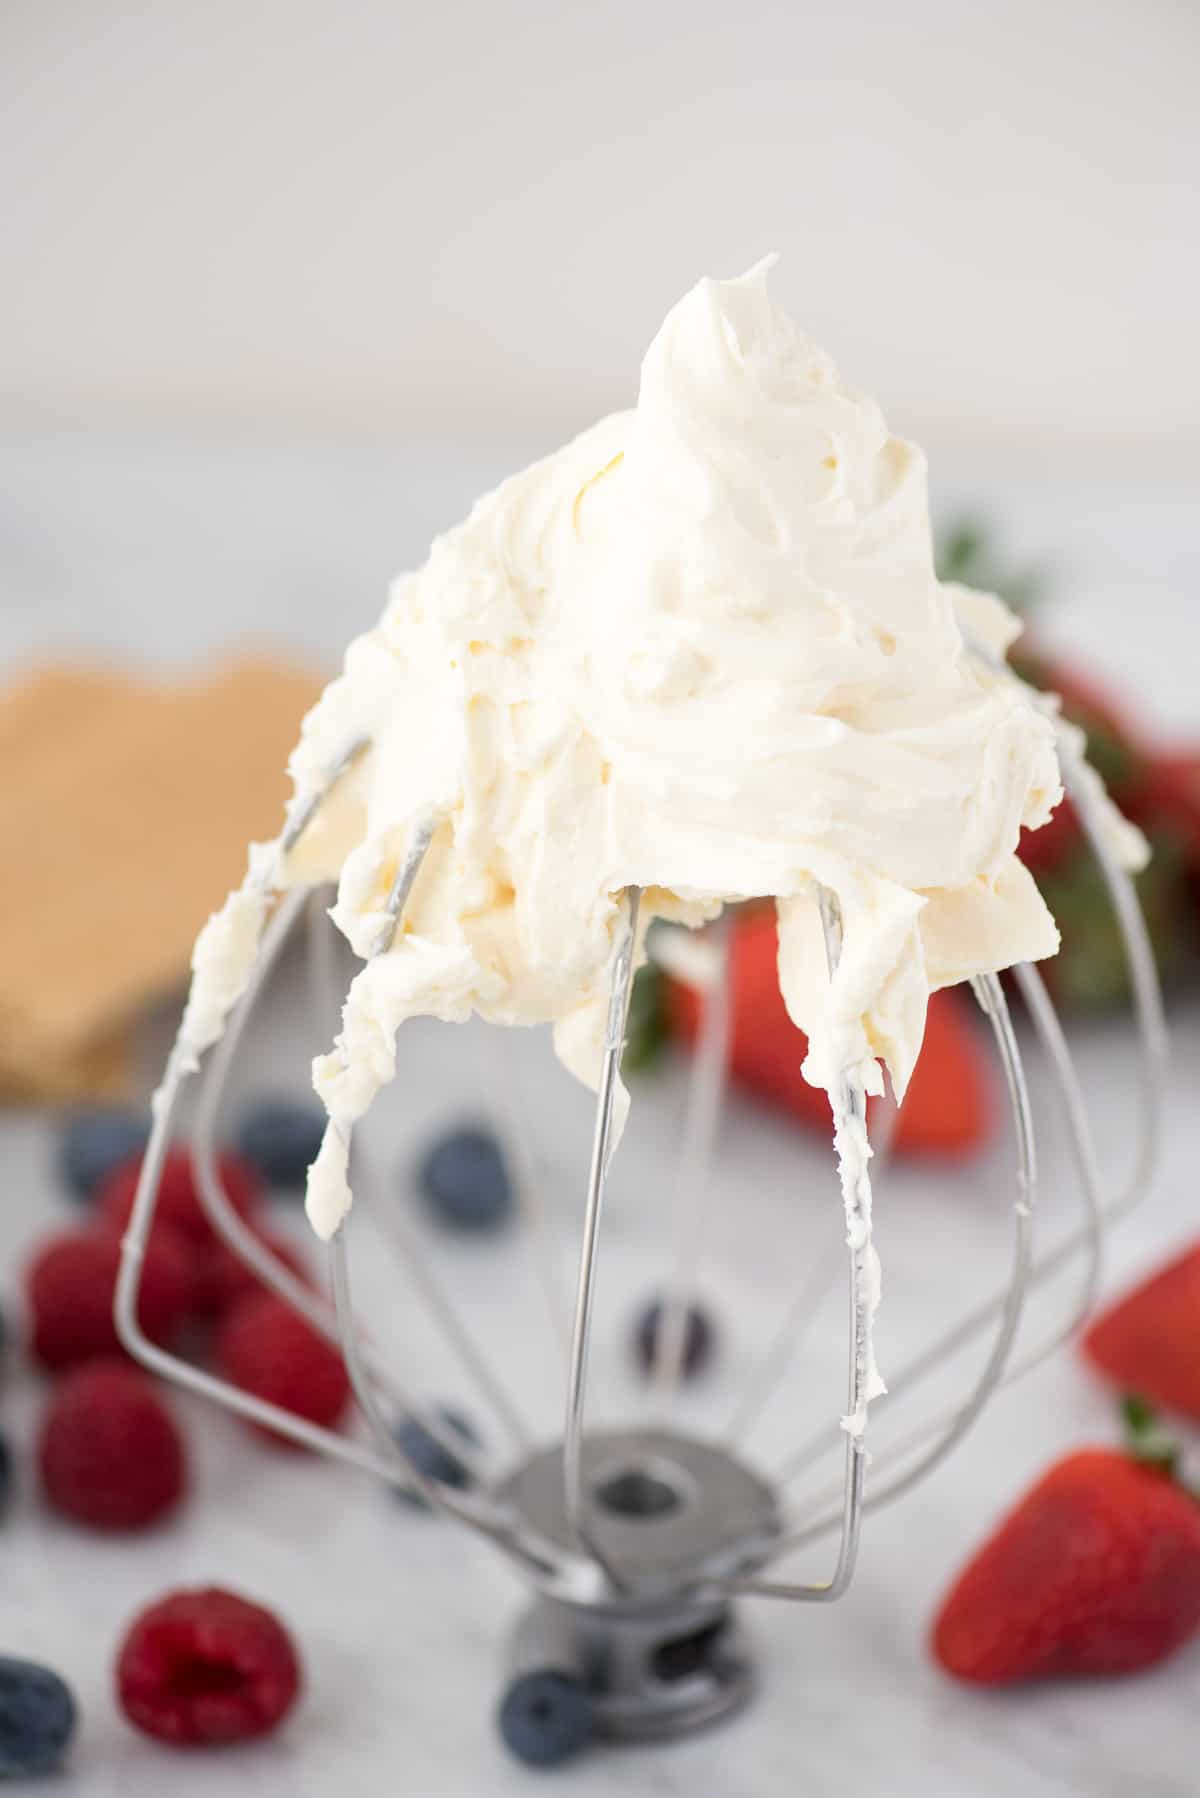 kitchenaid whisk attachment with cheesecake whipped cream on it with berries in background